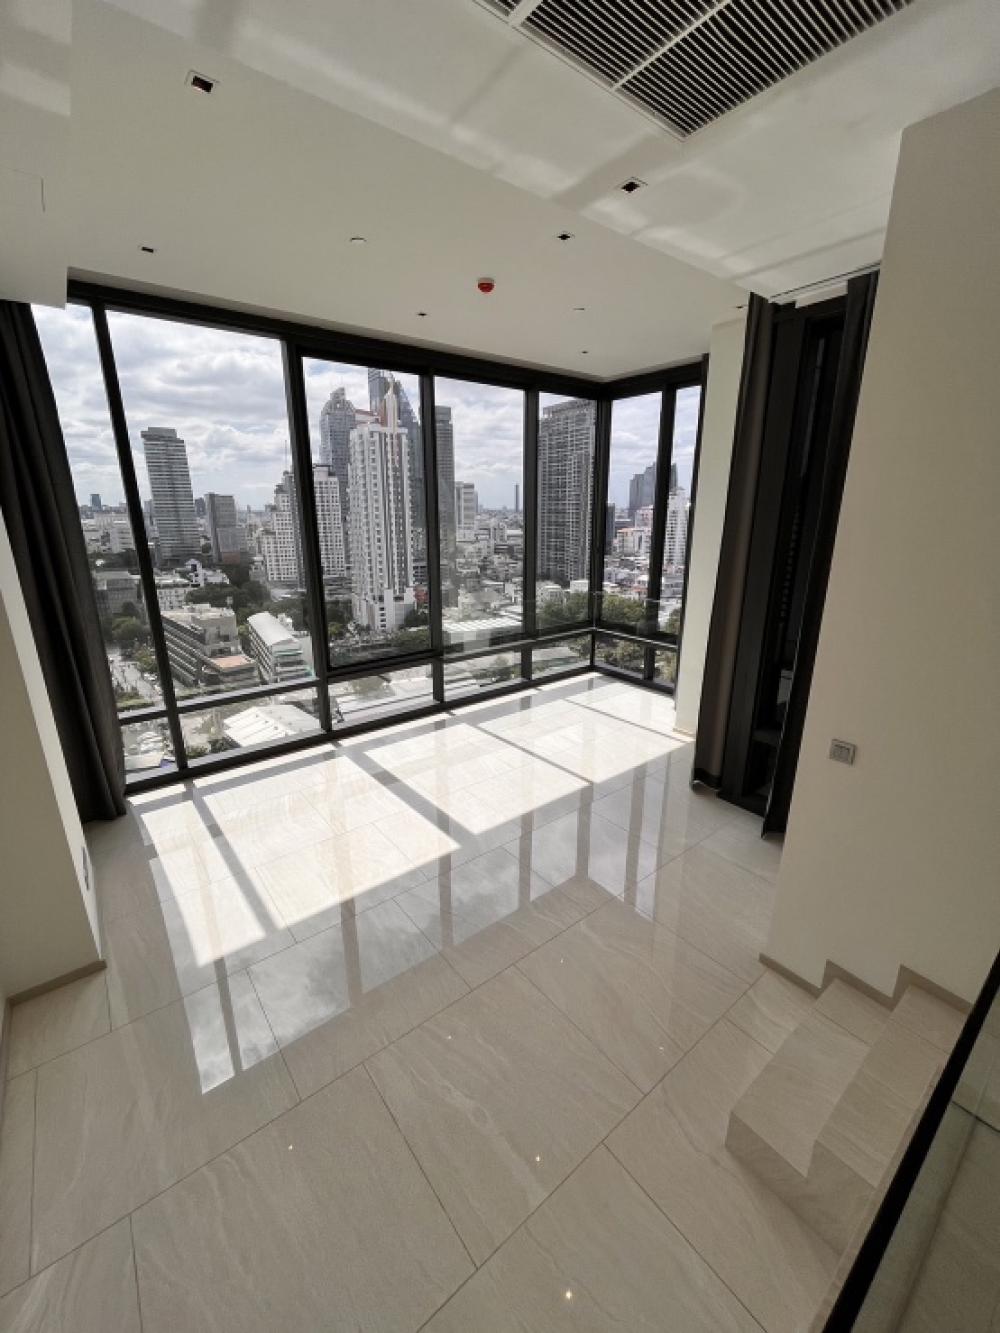 For SaleCondoSilom, Saladaeng, Bangrak : Selling cheap, price reduced 2 million, Ashton Silom Condo, next to Silom Road, Silom Intersection, near BTS Chong Nonsi 350 meters, room size 2bed 2bath 86 sq m, high floor, view of Mahanakhon Building, first hand project room, price 15,990,000 baht only